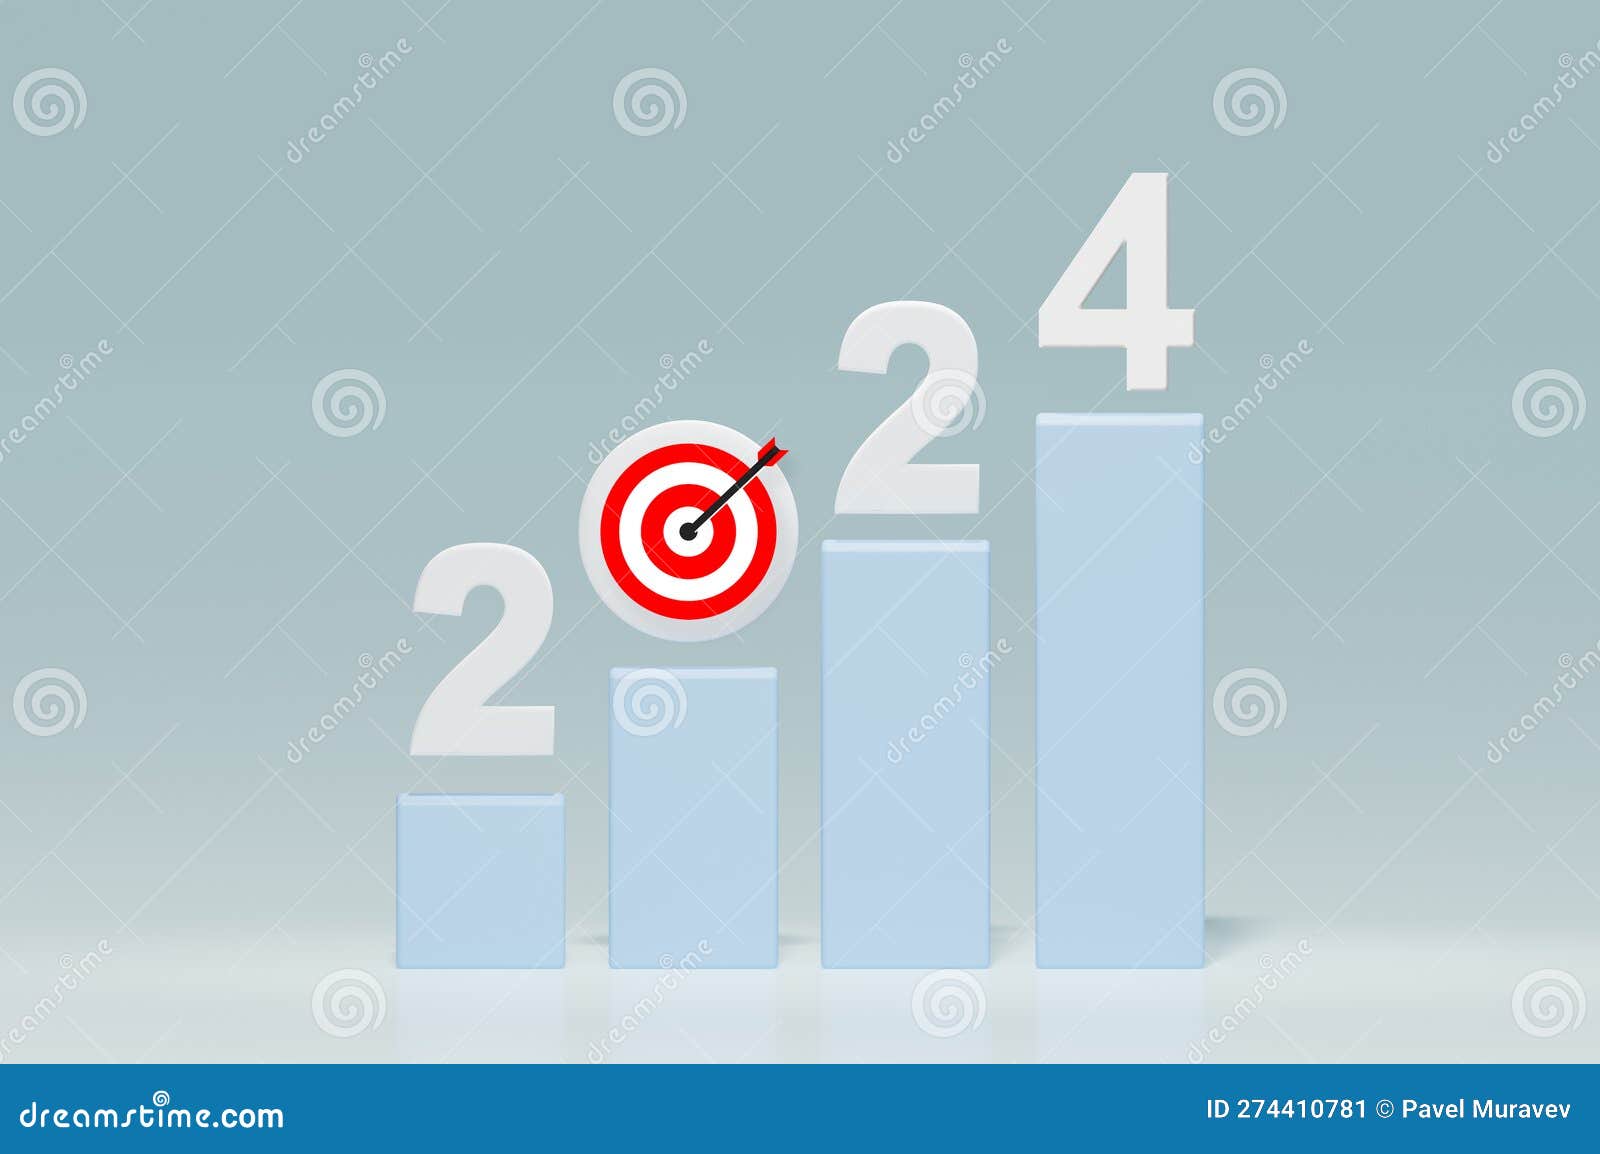 Growth Chart for 2024. Plan for Economic and Financial Growth in 2024